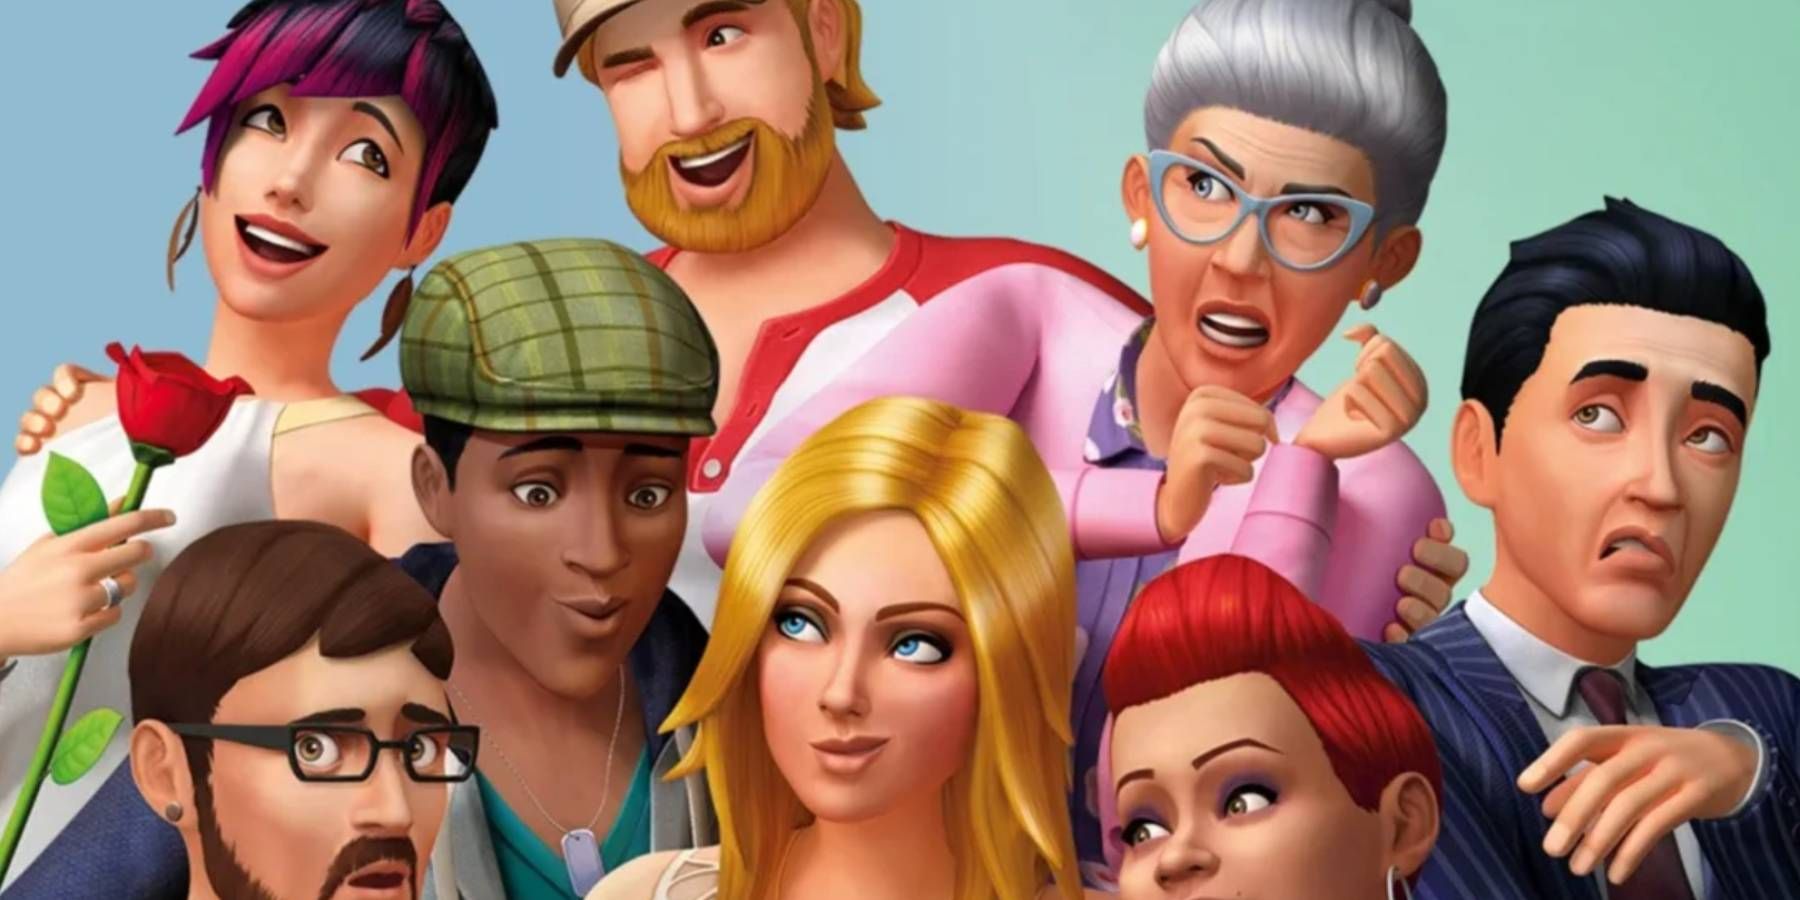 A collection of sims from The Sims 4